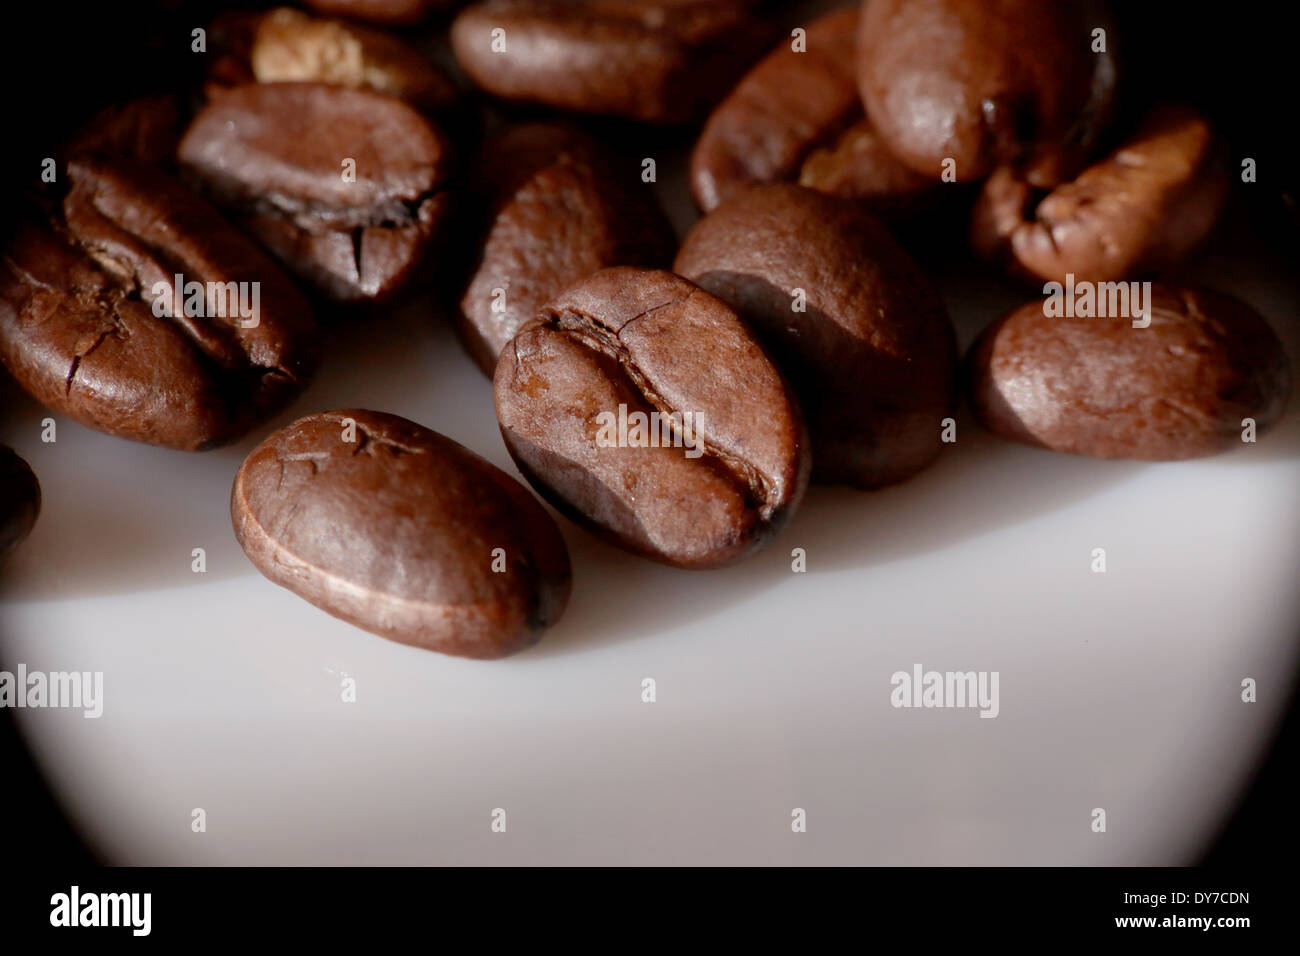 Coffee beans macro shot on a white plate with room for text, available light and vignetting. Granos de café sobre plato blanco Stock Photo